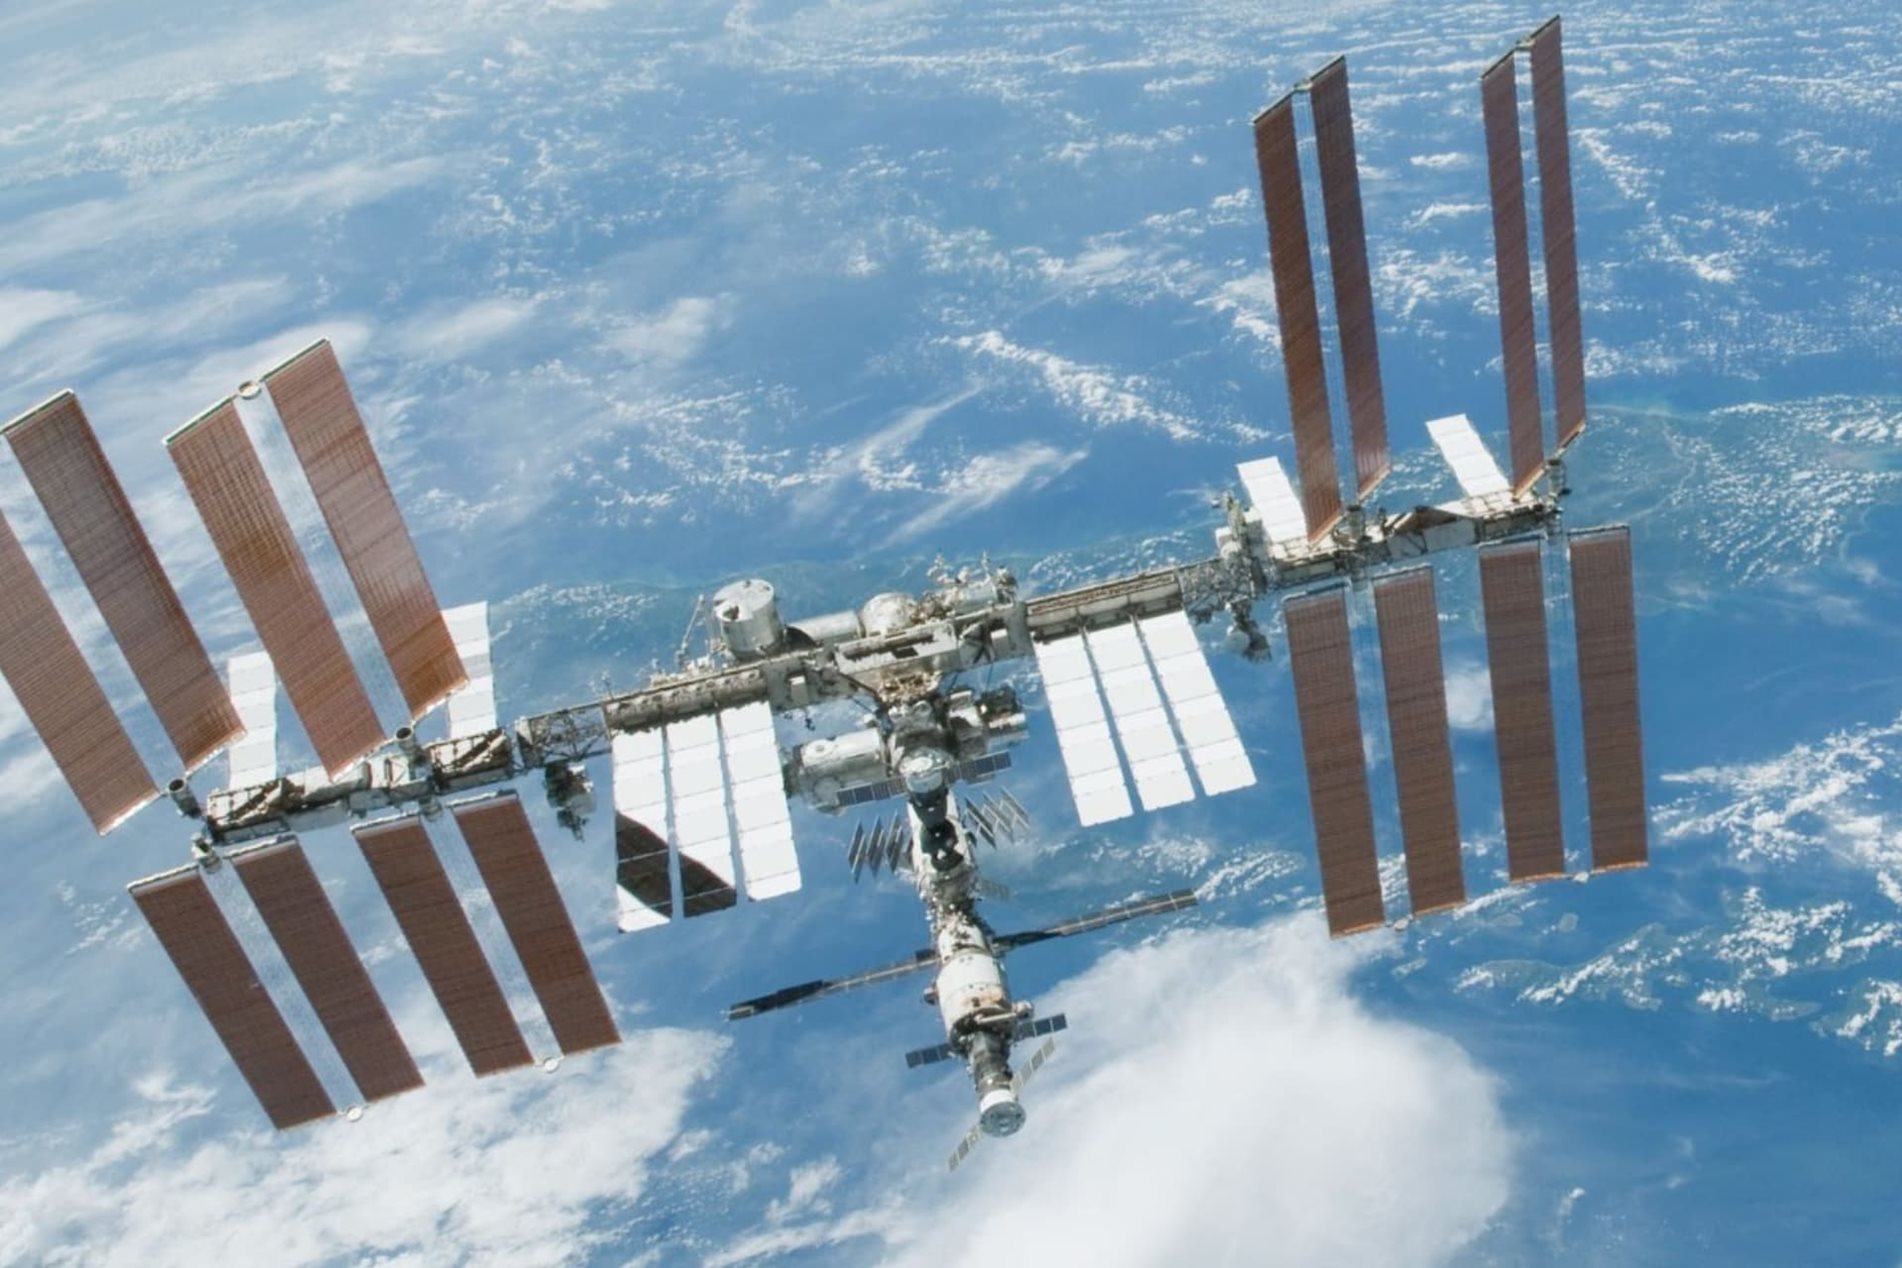 Aggie Capstone Project Activated On The International Space Station